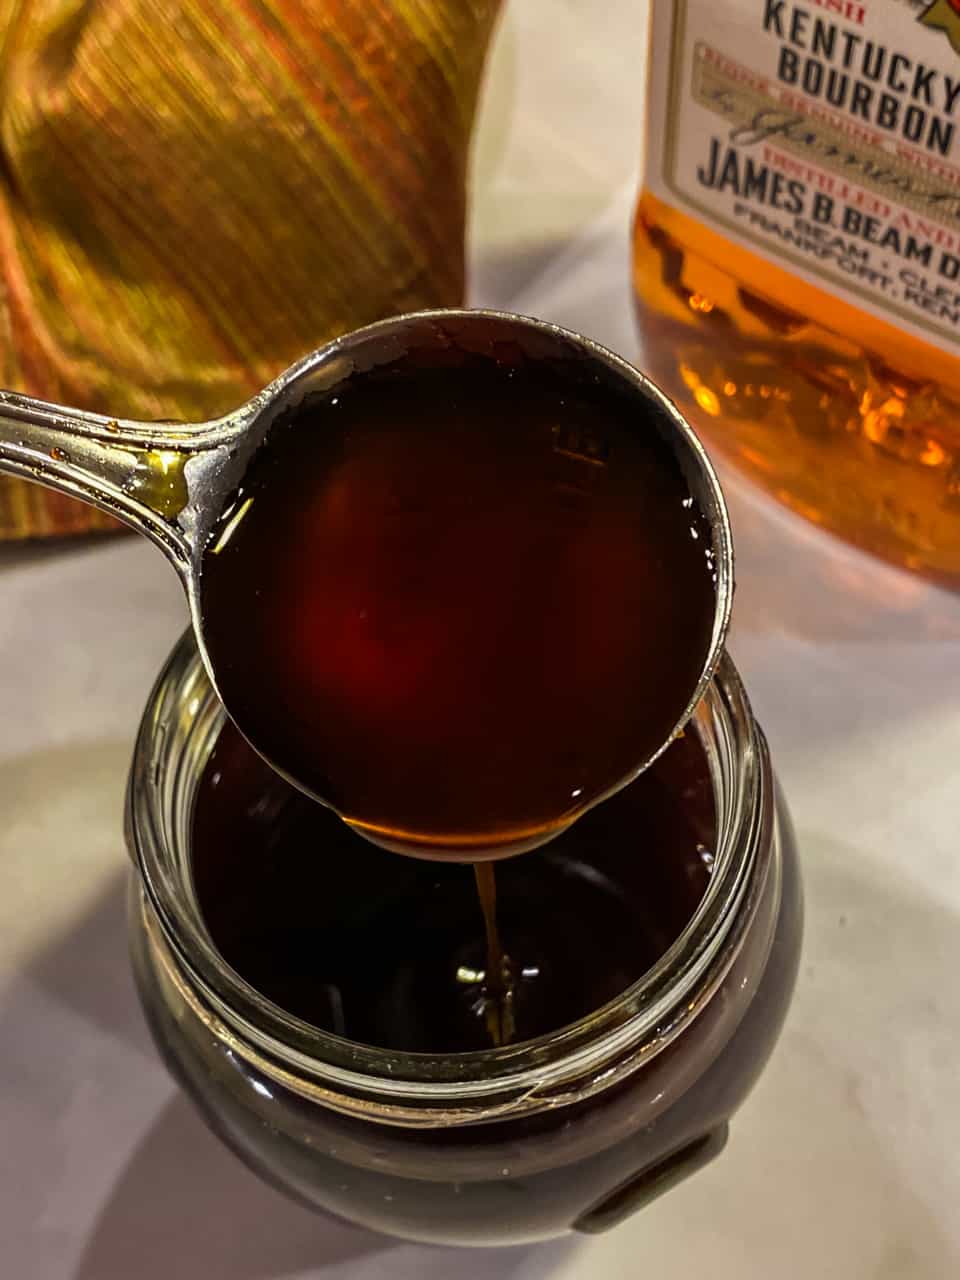 Top shot of bourbon glaze in a glass jar with a spoon